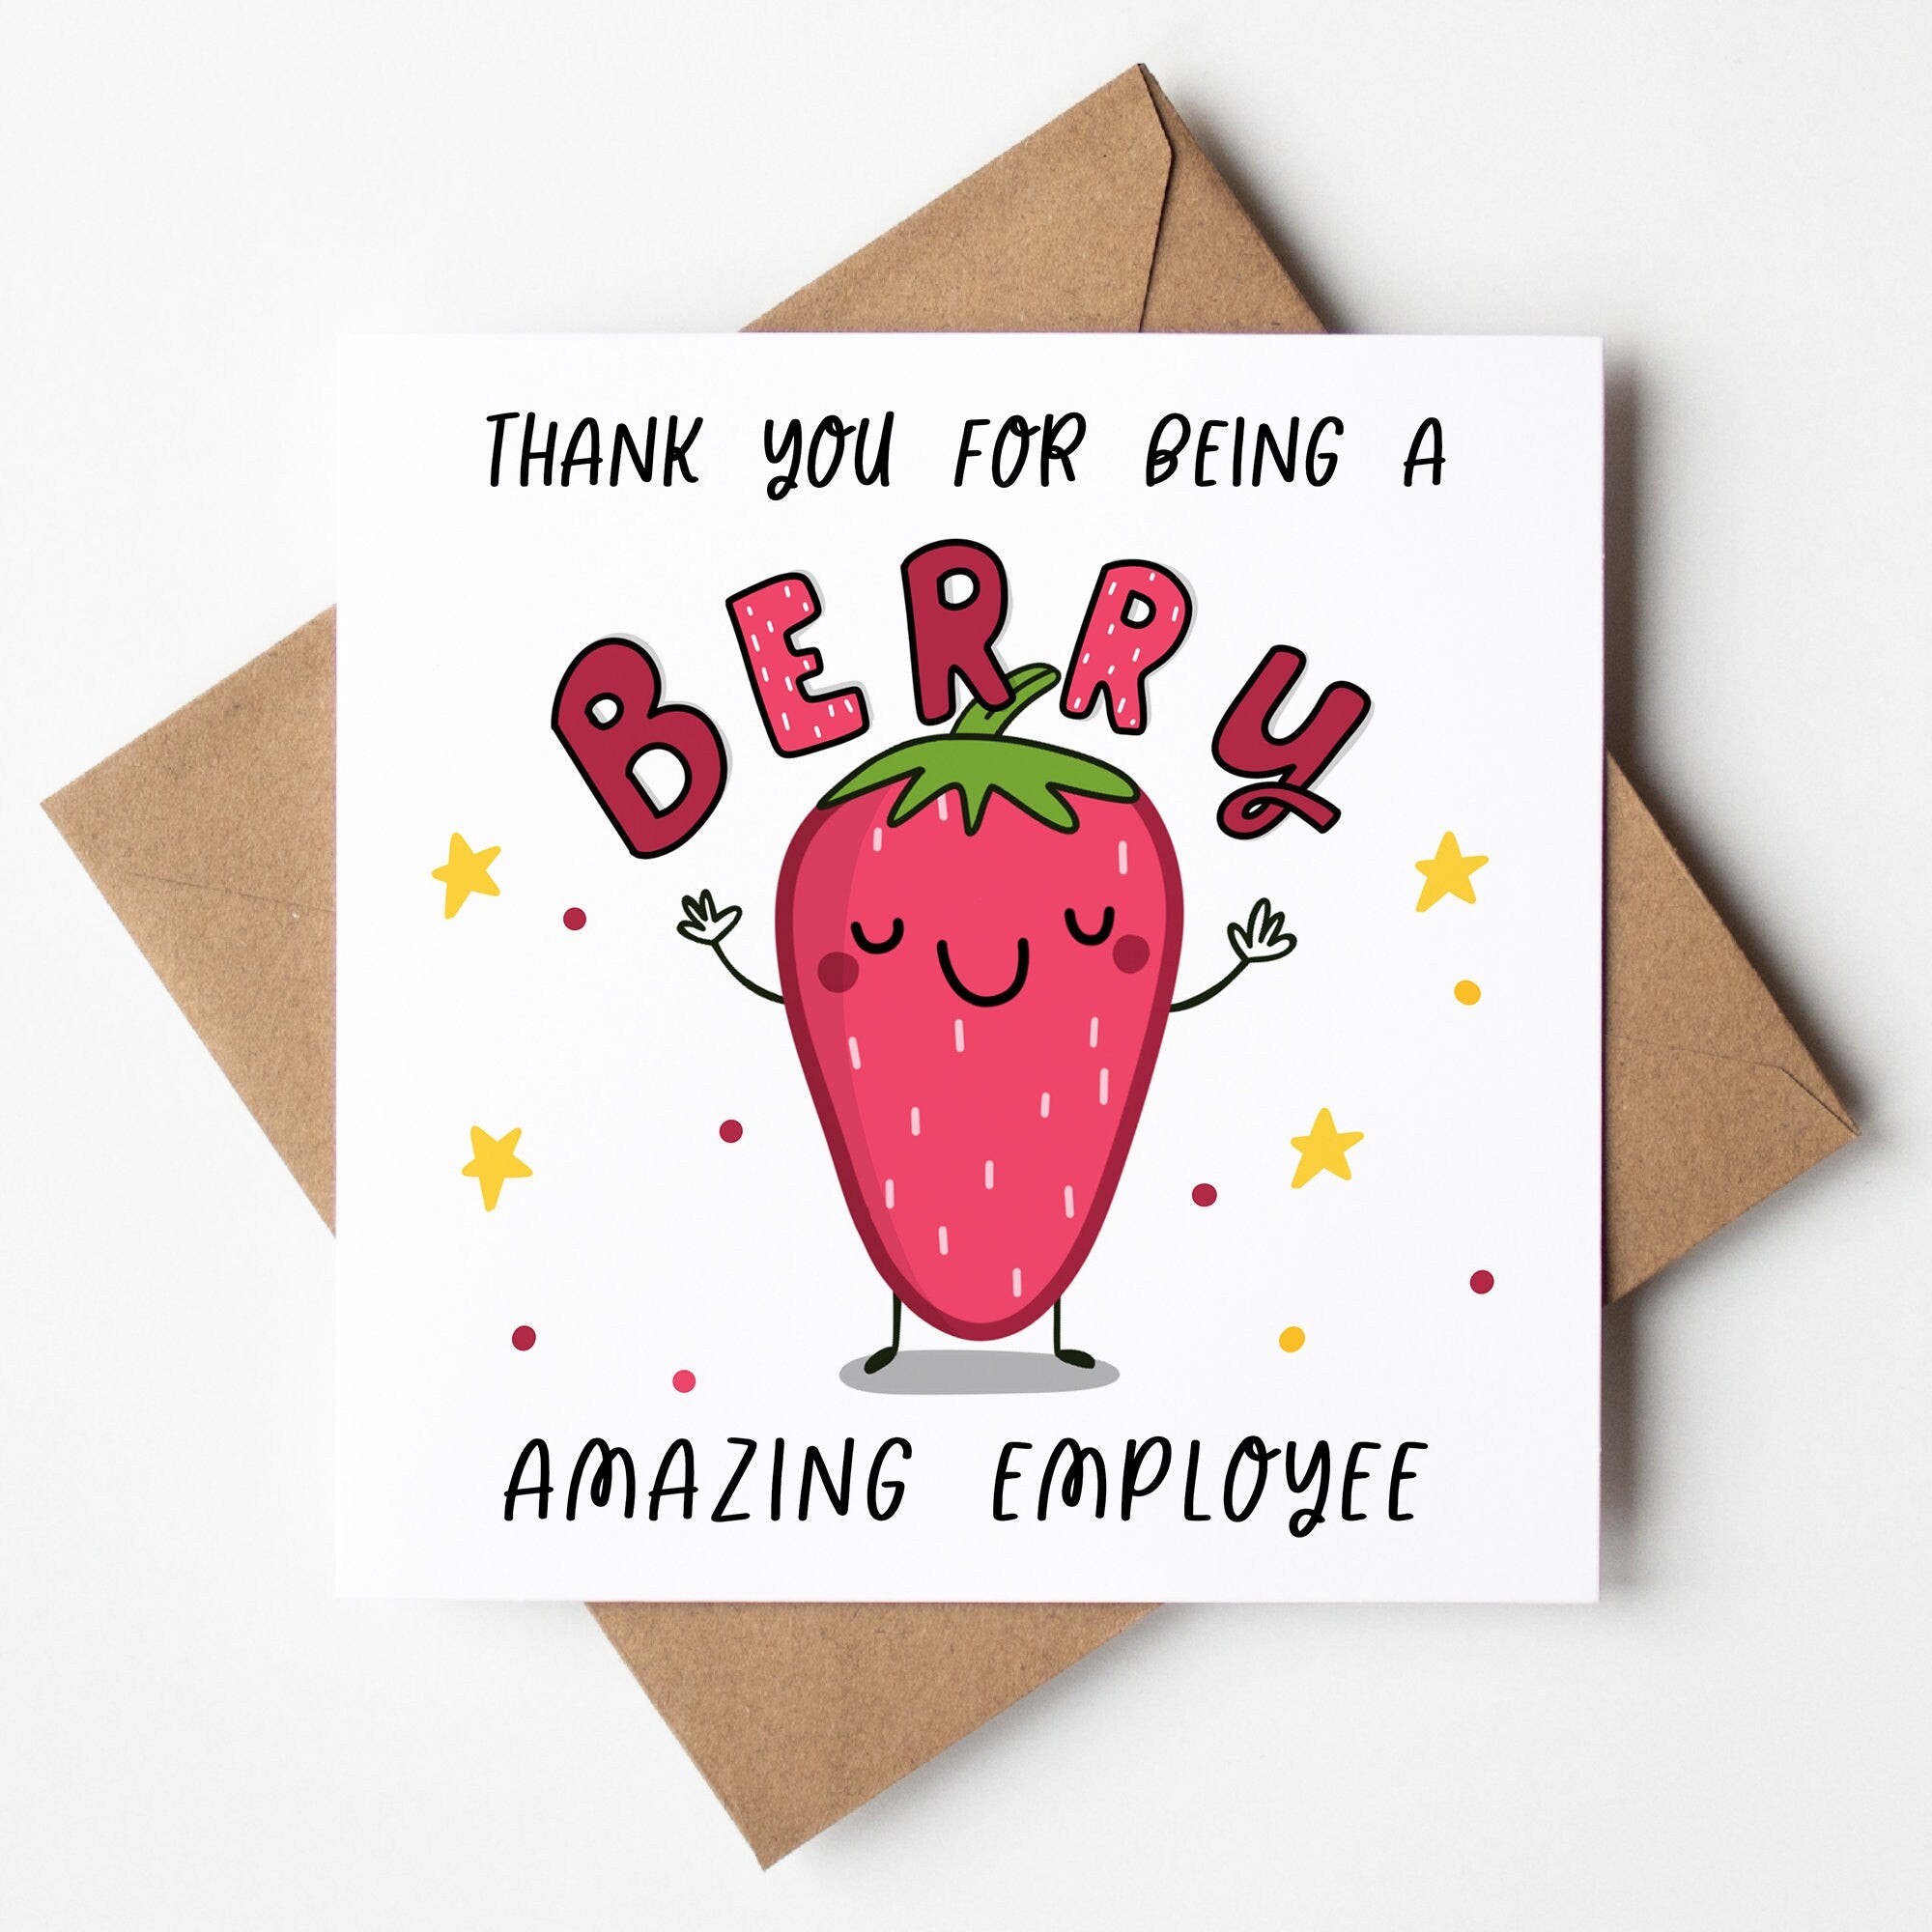 Employee Thank You Card, Work Bestie, Coworker Card, Appreciation, Gift To Say Thanks, Friendship Gift, Cute,  Best Friend